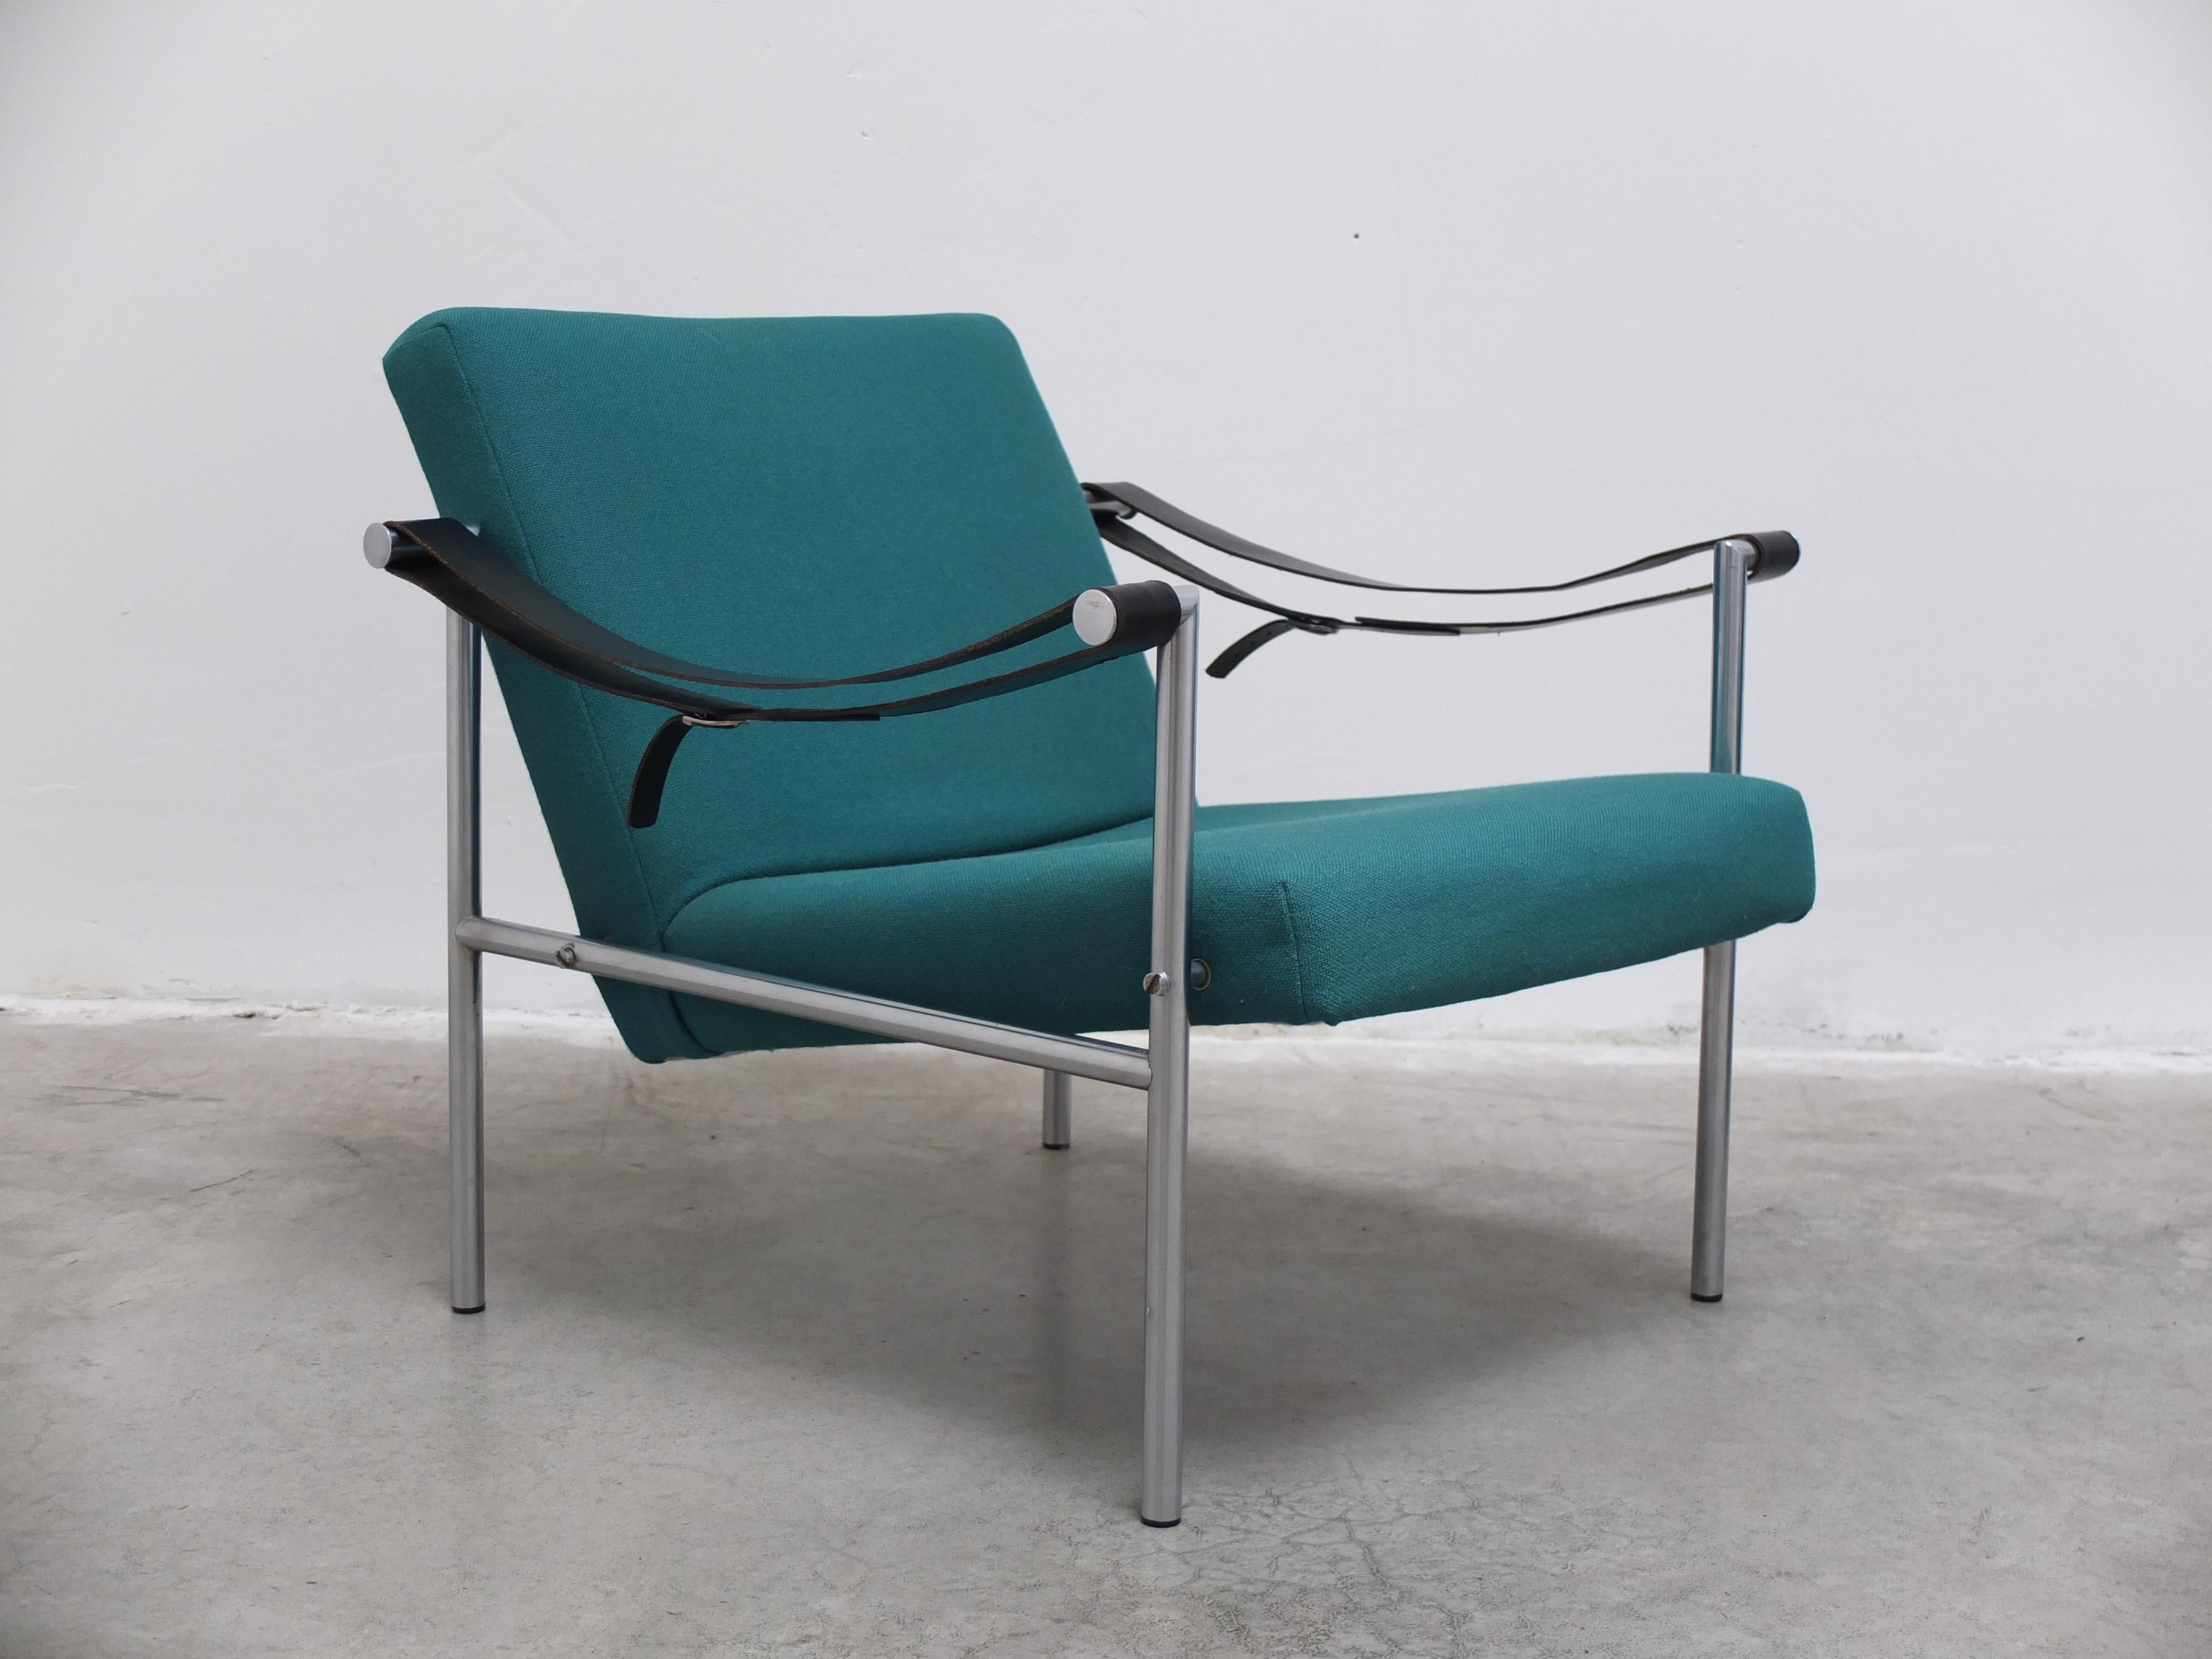 Pair of 'SZ08' Lounge Chairs by Martin Visser for 't Spectrum, 1960 For Sale 7